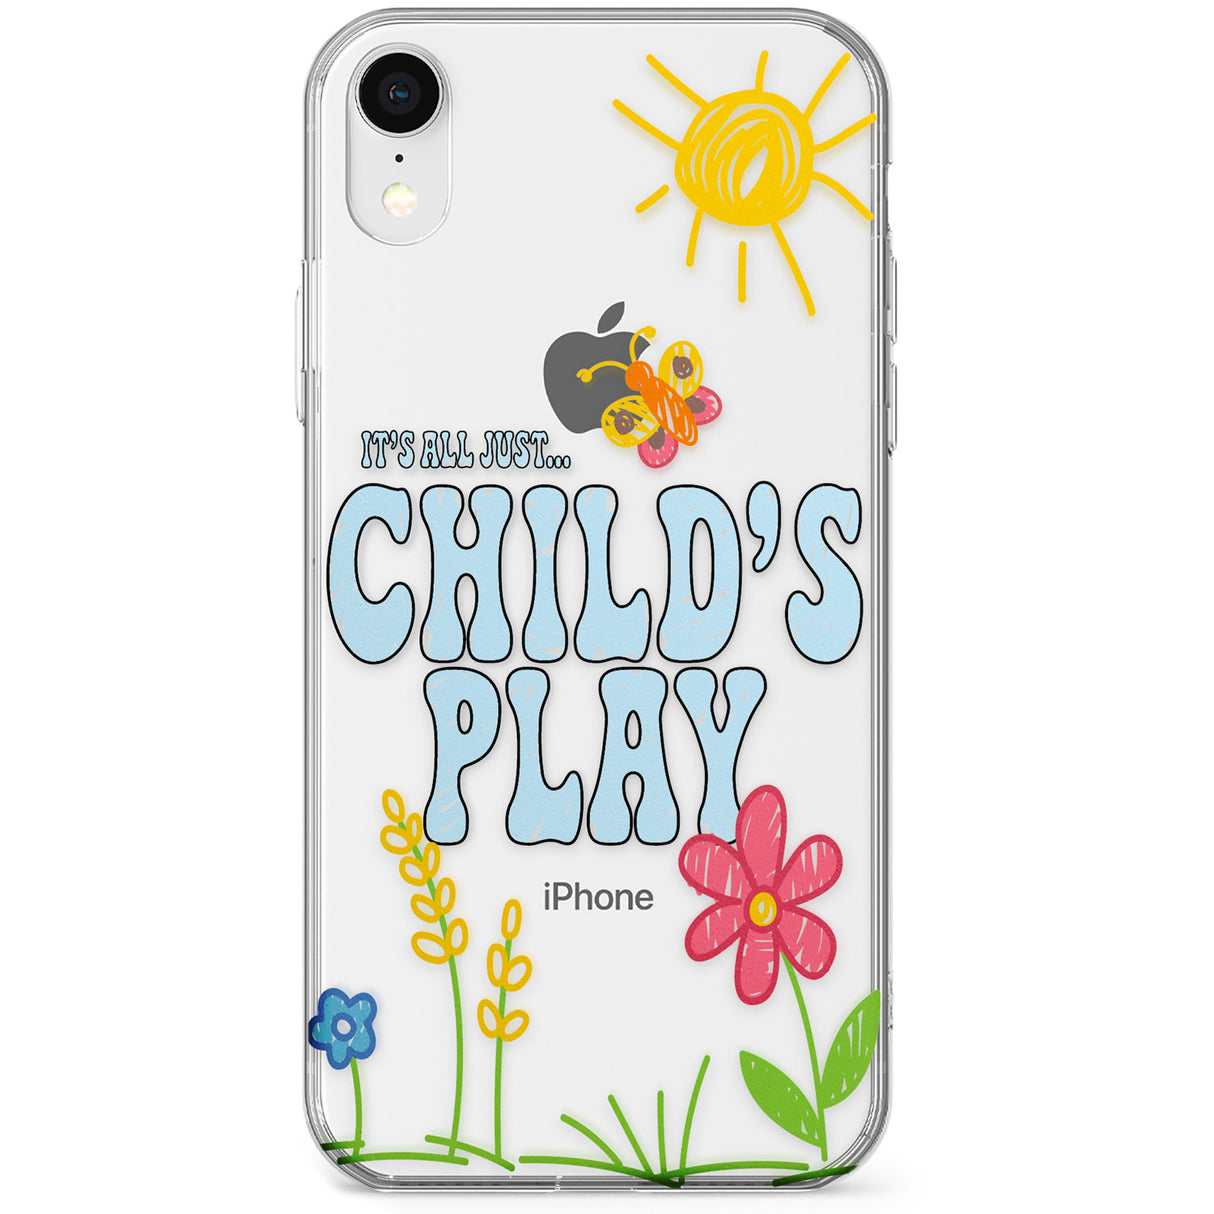 Child's Play Phone Case for iPhone X, XS Max, XR